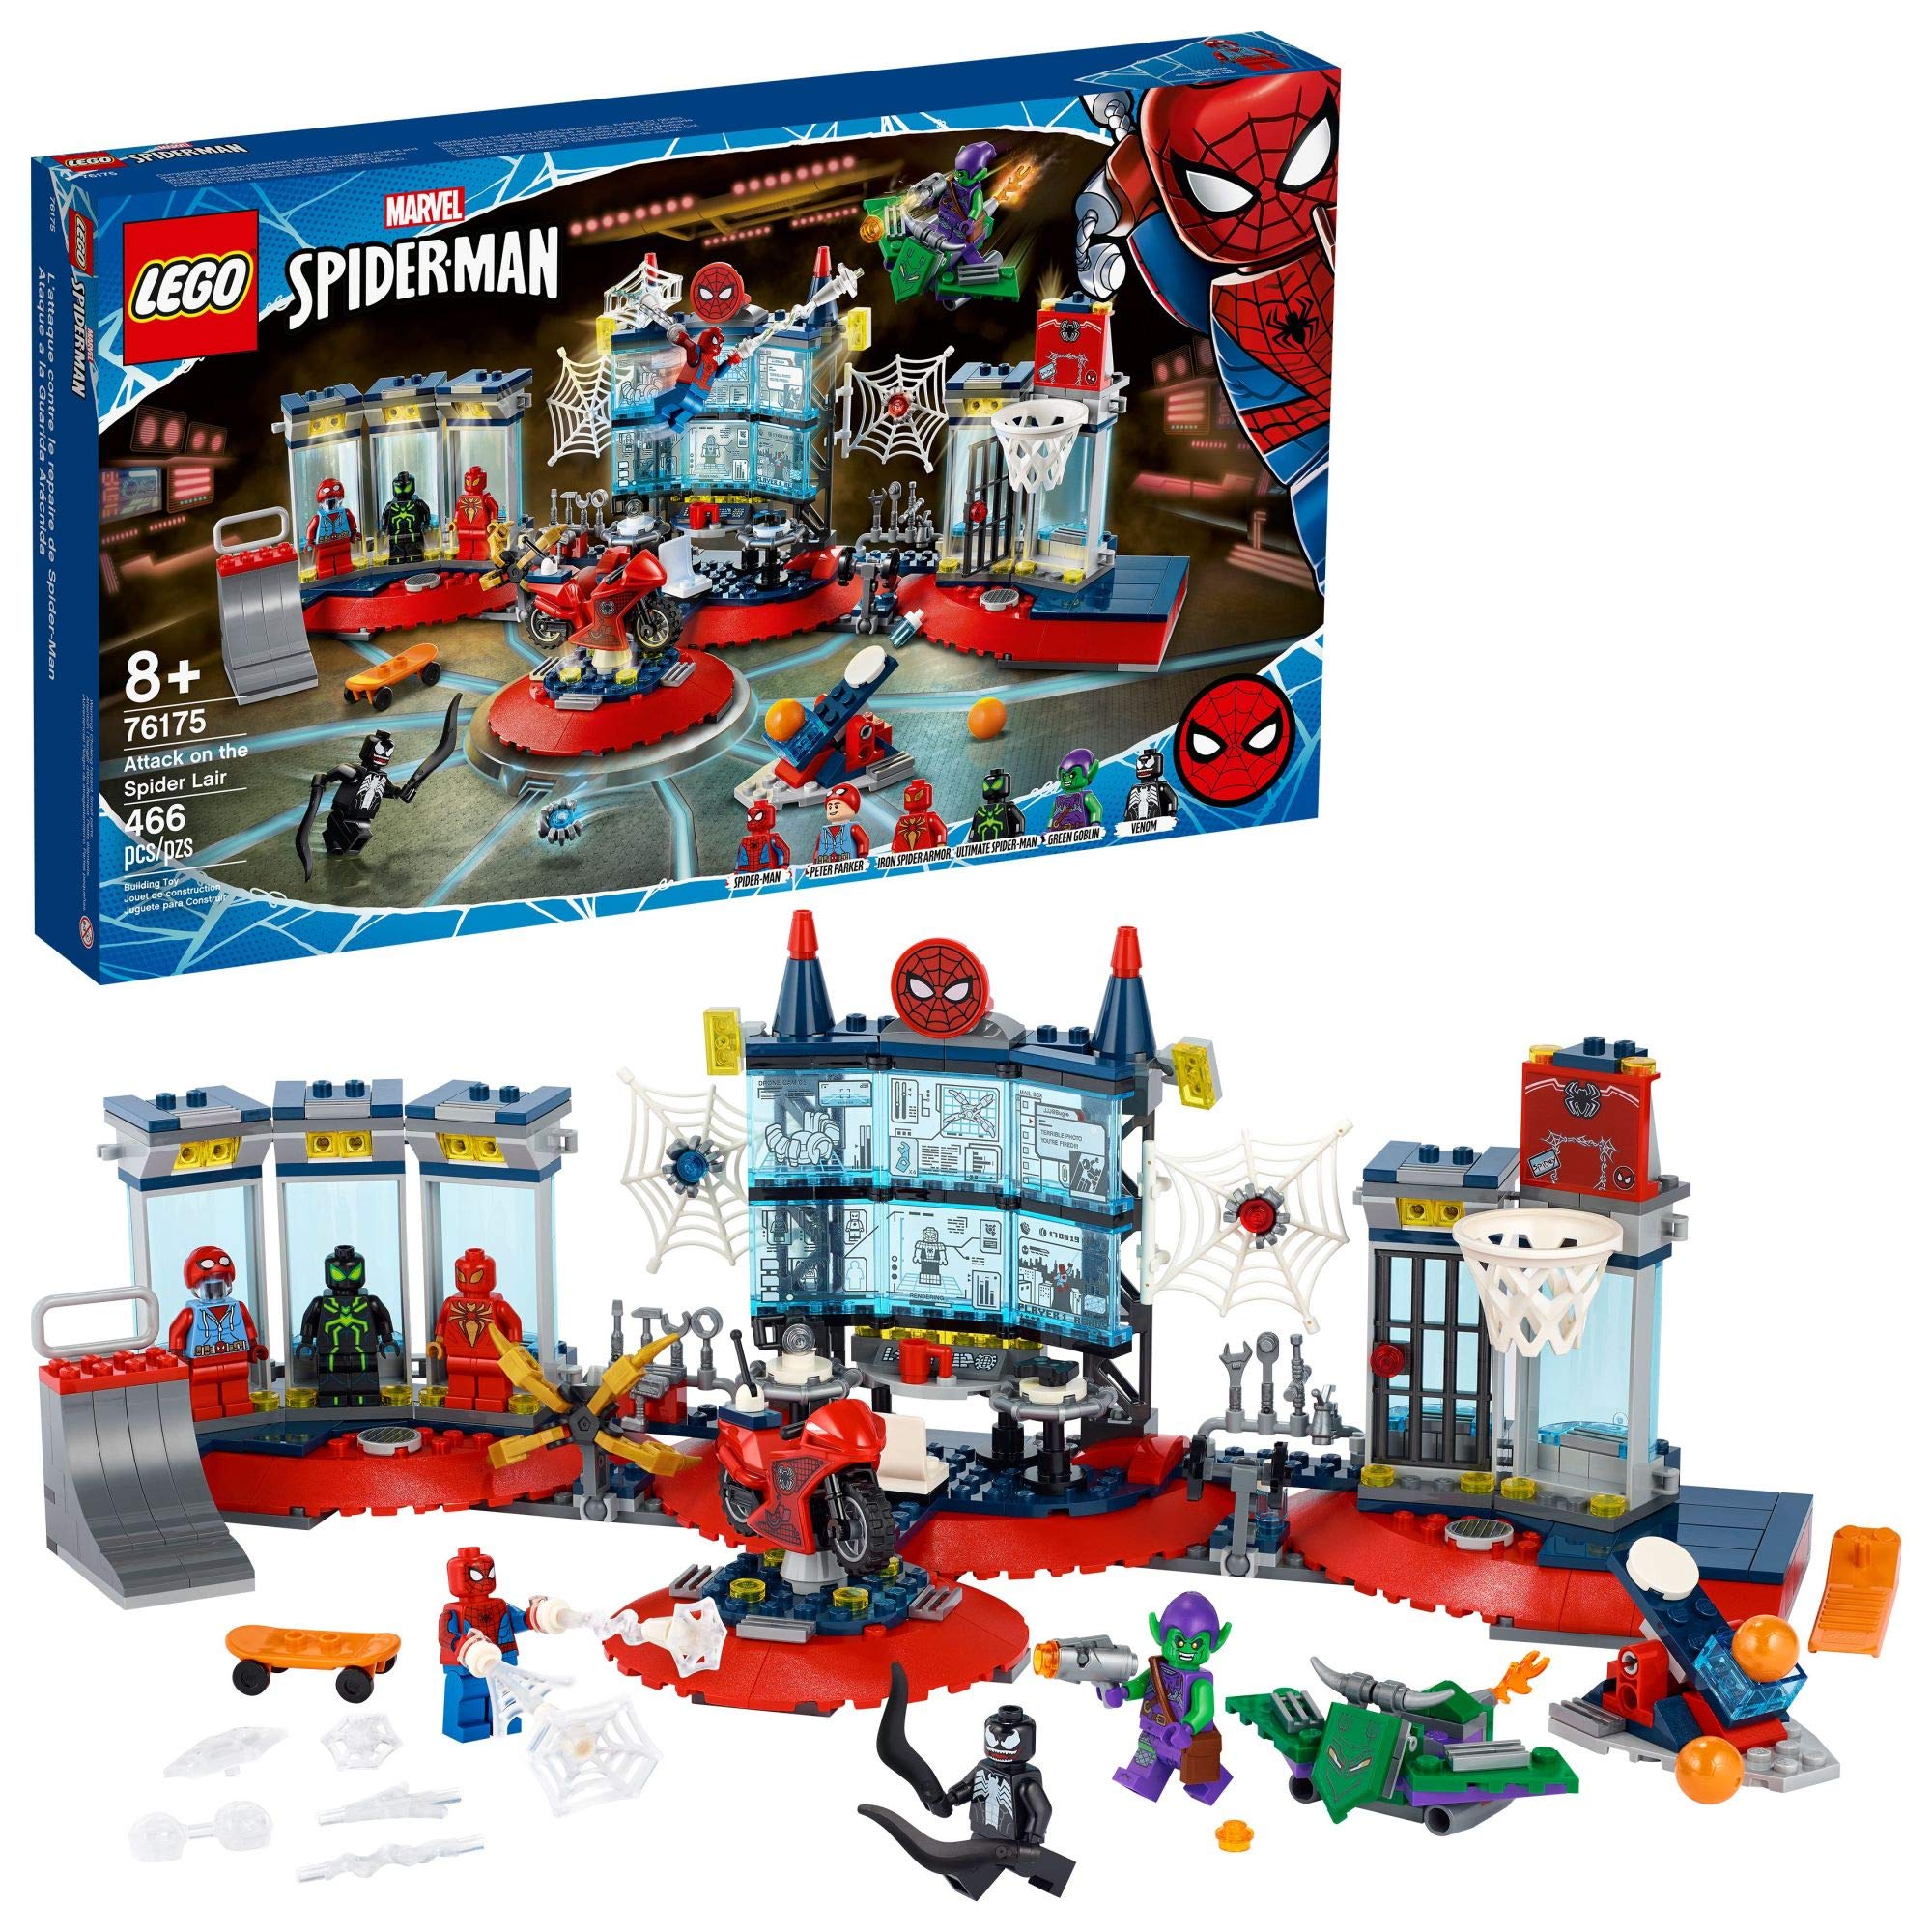 Mua LEGO Marvel Spider-Man Attack on The Spider Lair 76175 Cool Building  Toy, Featuring The Spider-Man Headquarters; Includes Spider-Man, Green  Goblin and Venom Minifigures, New 2021 (466 Pieces) trên Amazon Mỹ chính